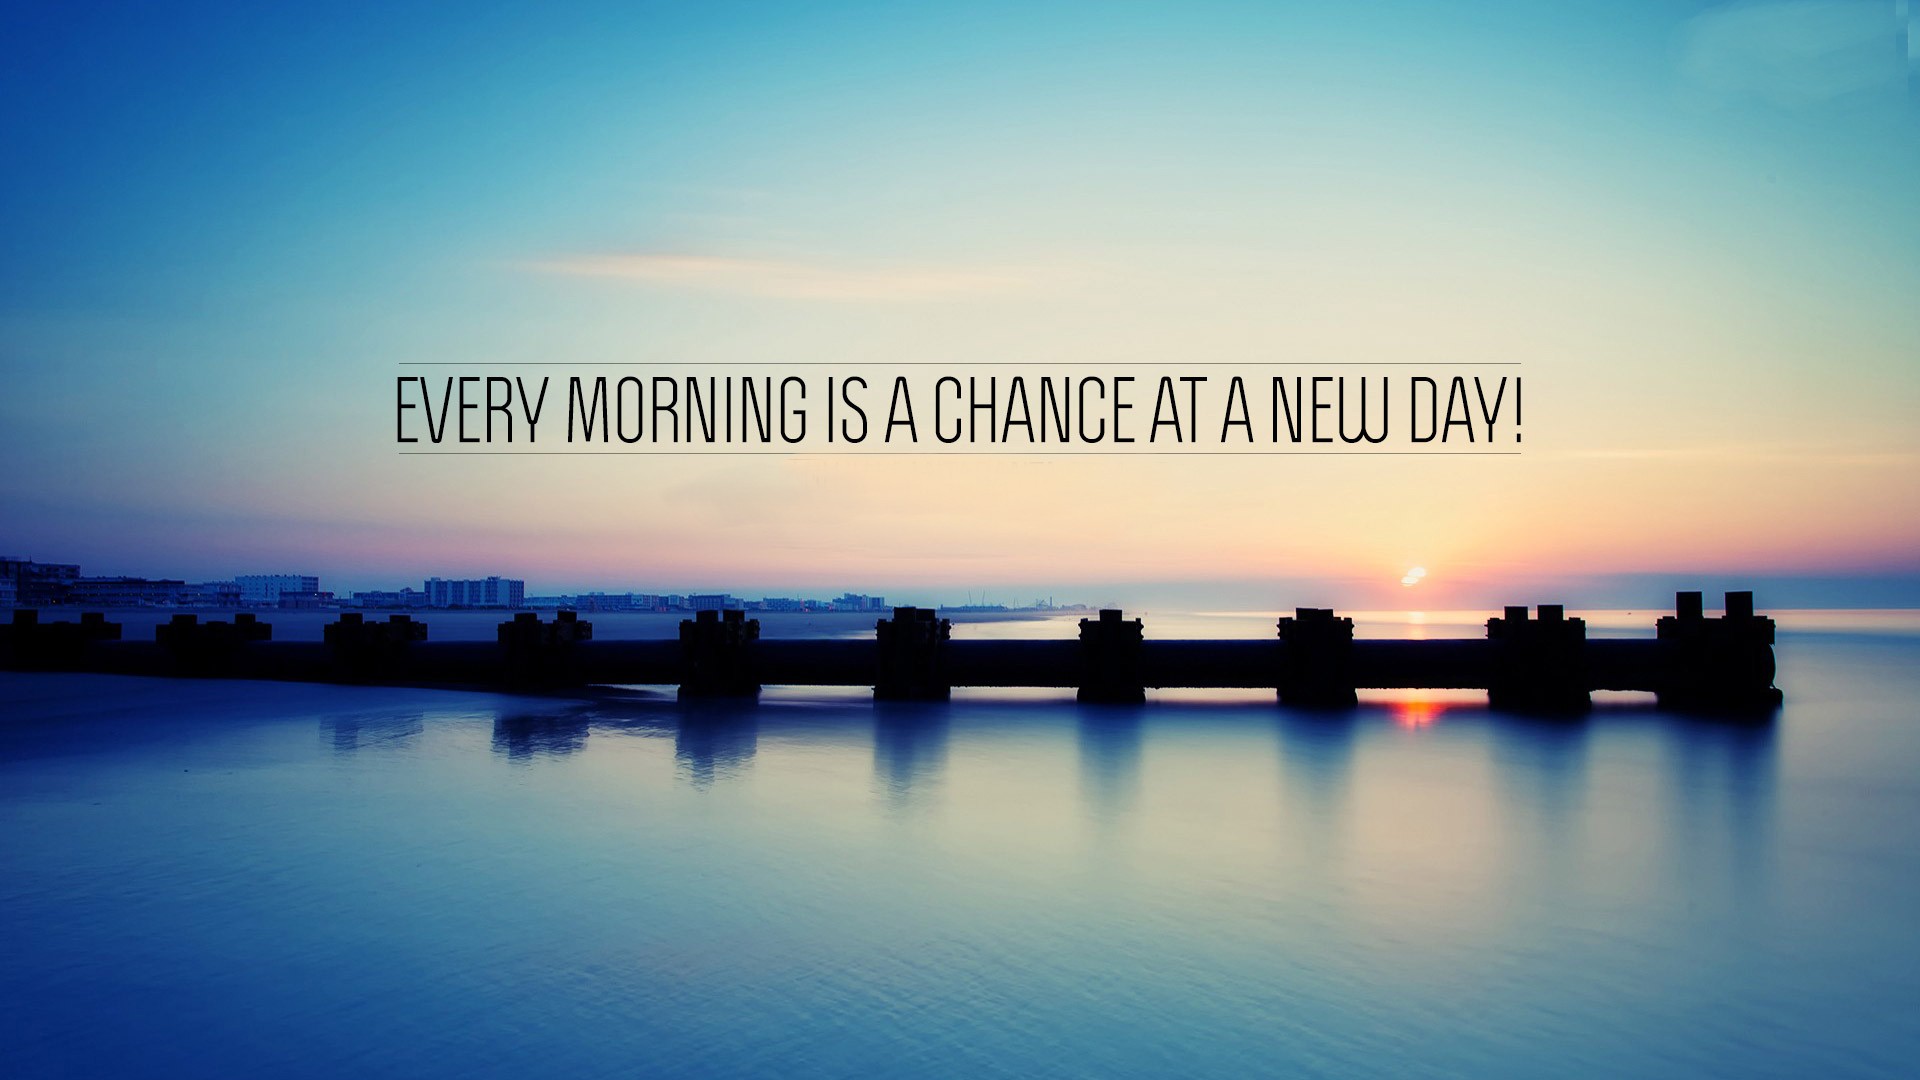 Good Wallpapers With Quotes New Day New Chances 19x1080 Wallpaper Teahub Io